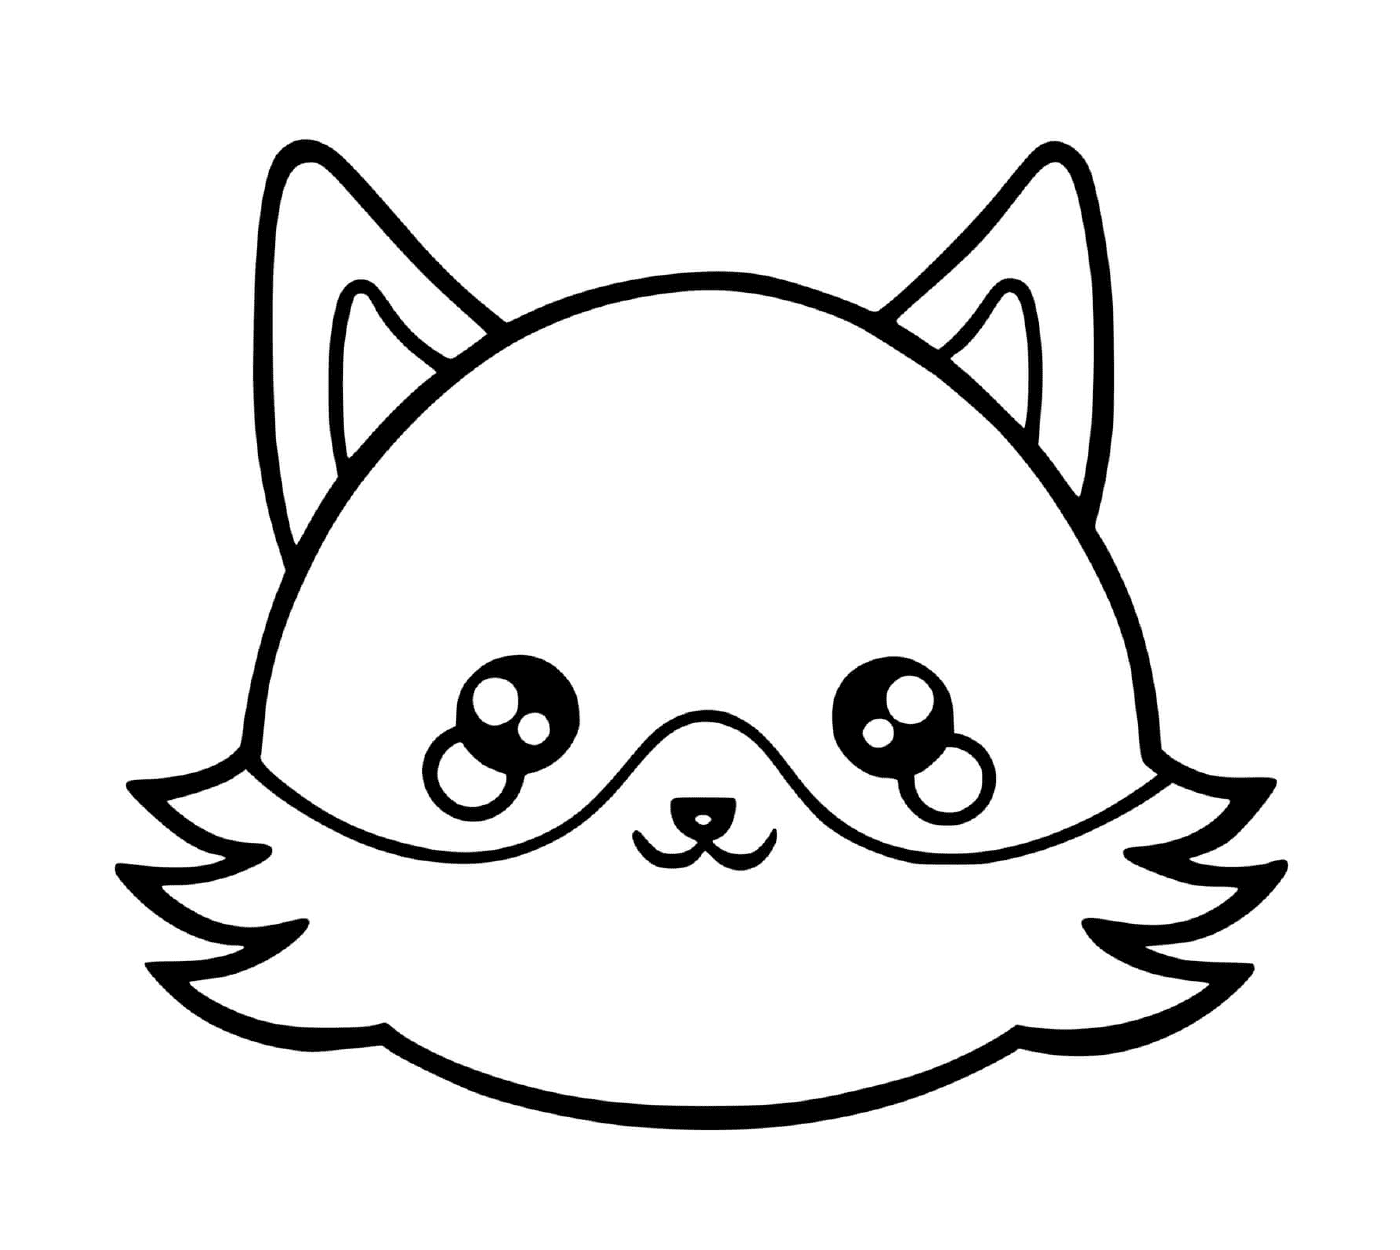  A fox with a cat face drawn on it 